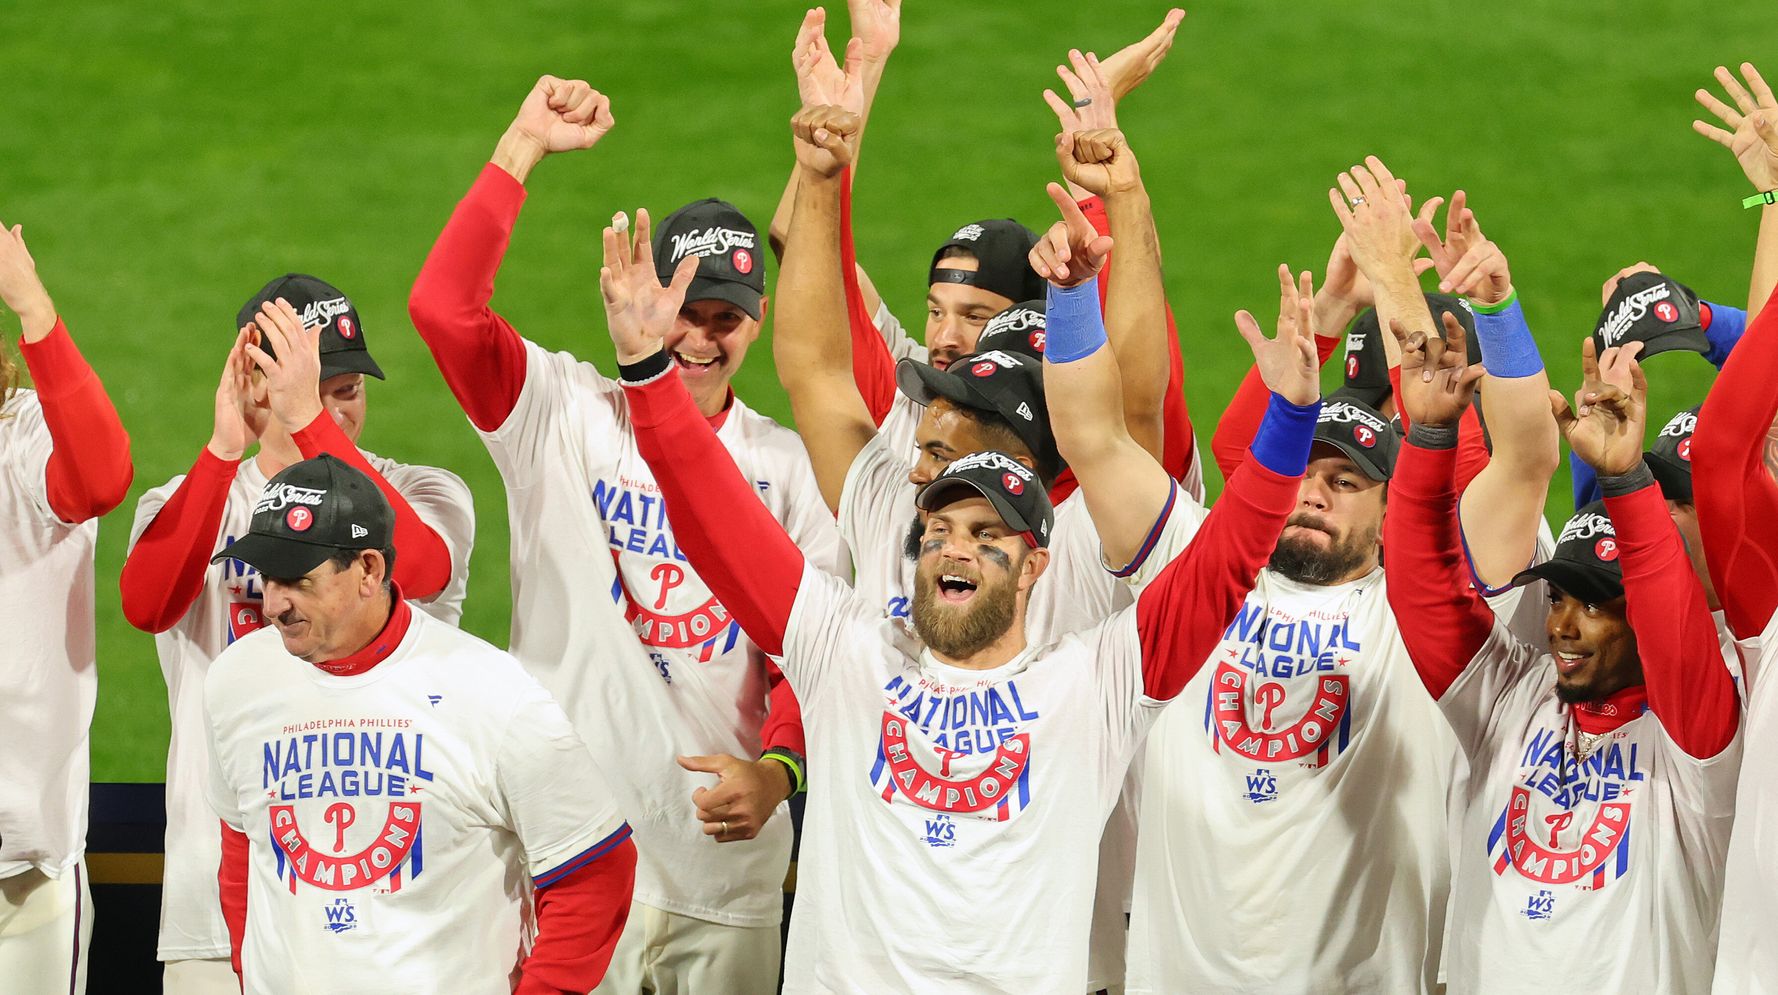 Philadelphia Phillies are headed to the World Series for the 1st